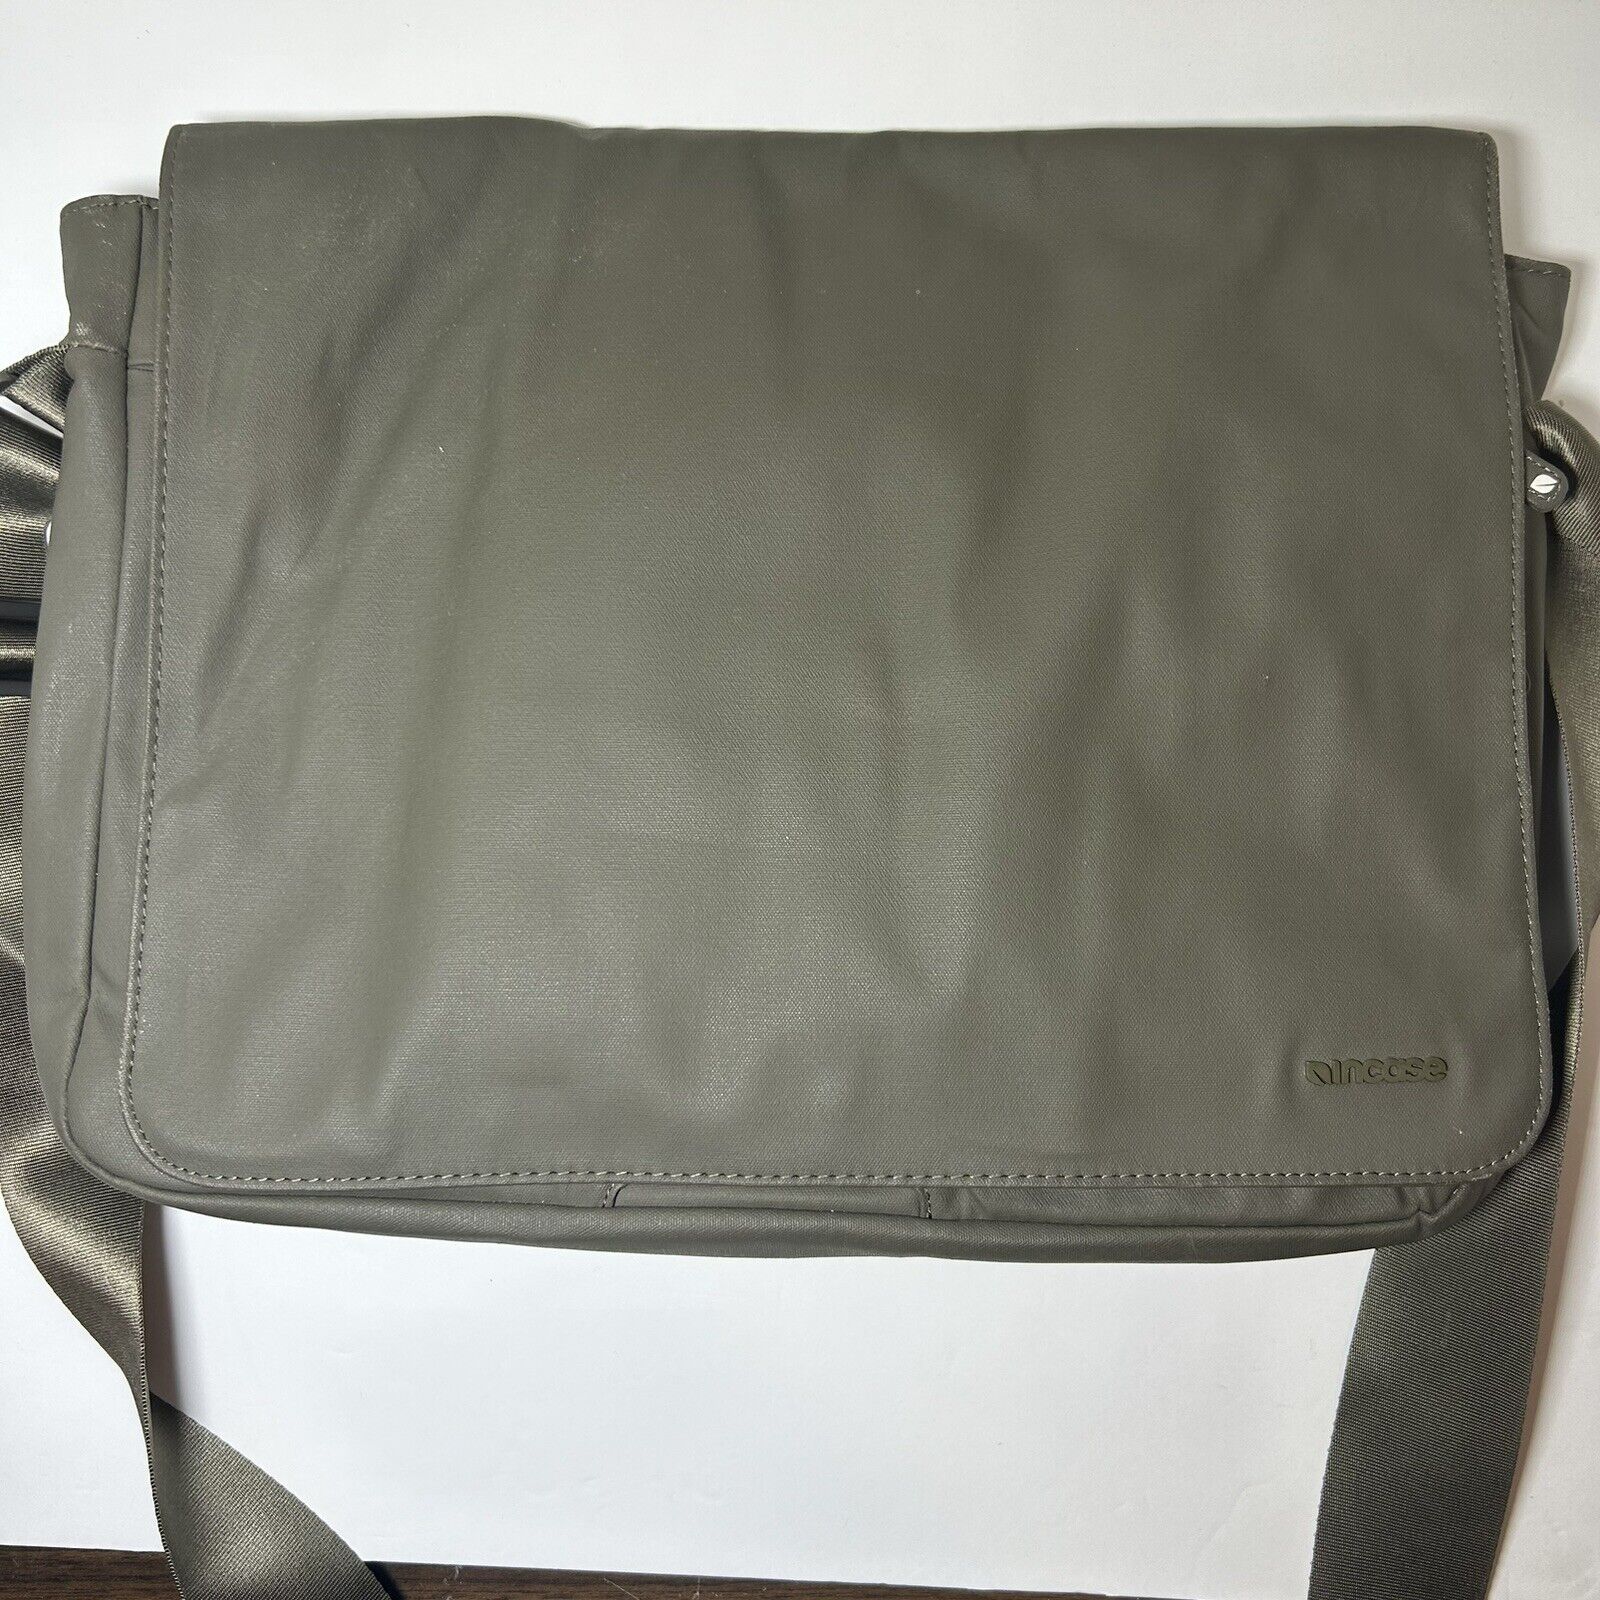 INCASE COATED CANVAS MACBOOK MESSENGER BAG | TAUPE Excellent Condition